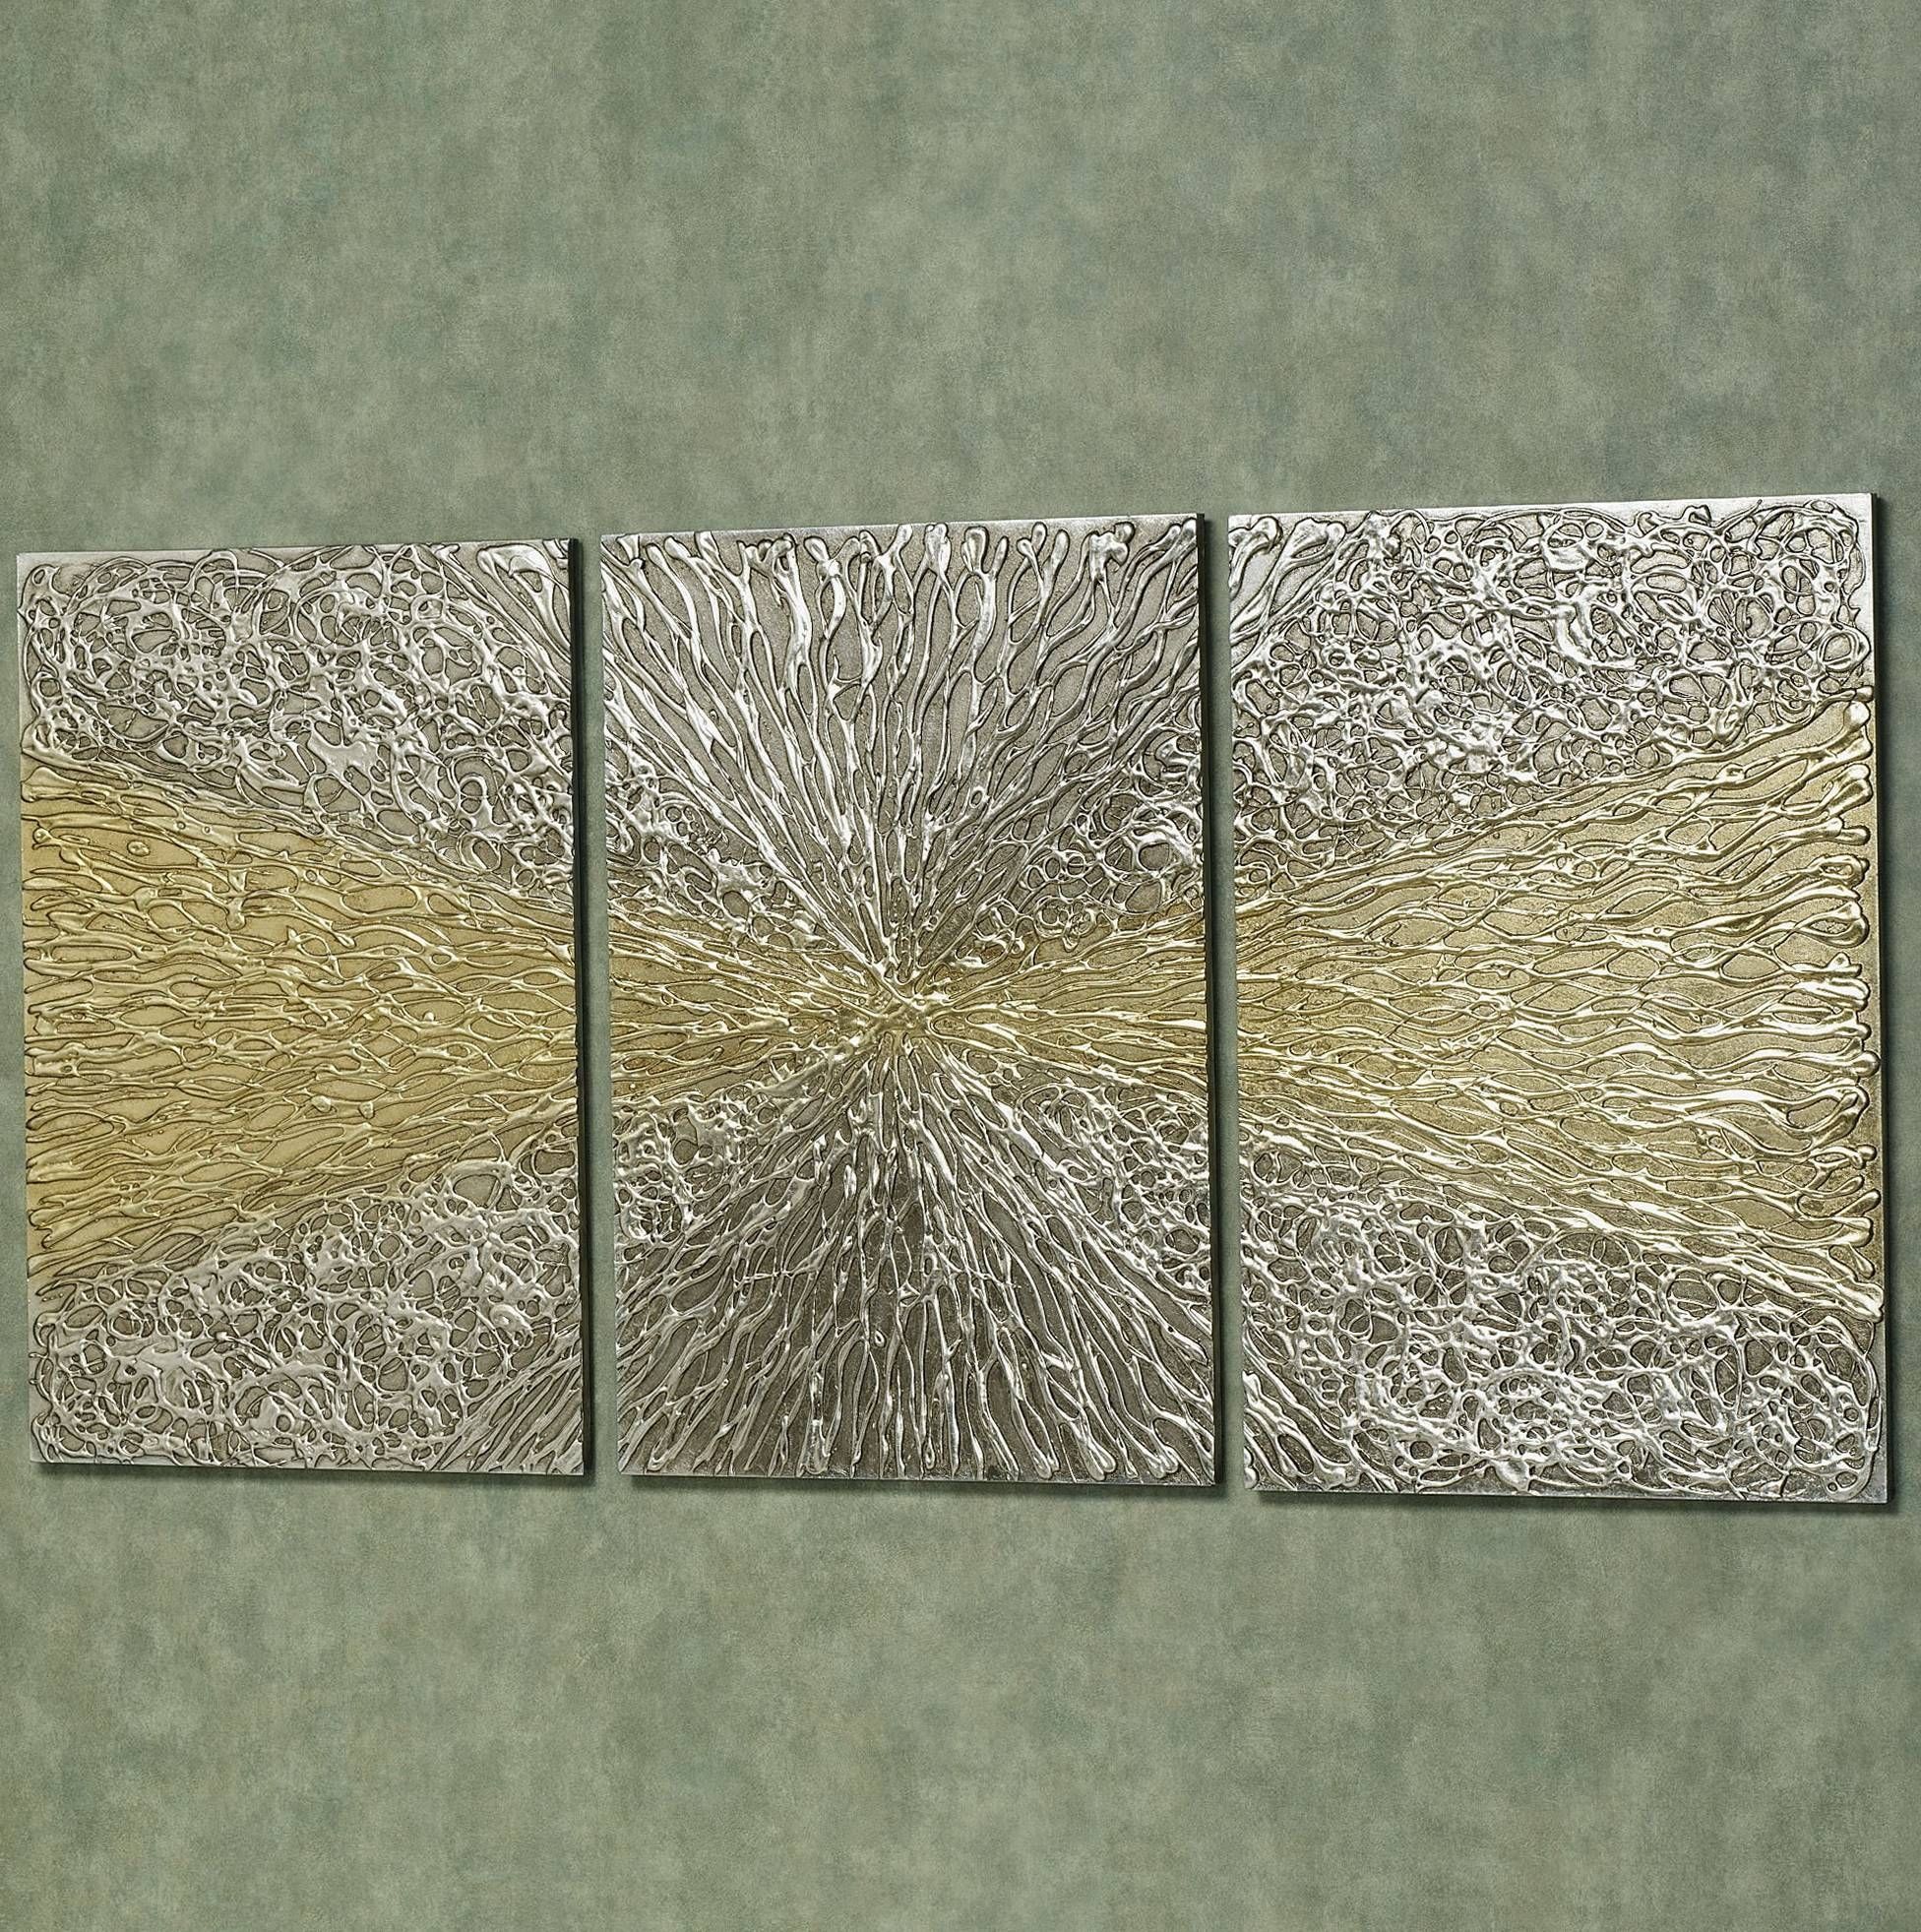 Gold And Silver Wall Art — Home Design Stylinghome Design Styling Pertaining To 2017 Silver And Gold Wall Art (View 1 of 15)